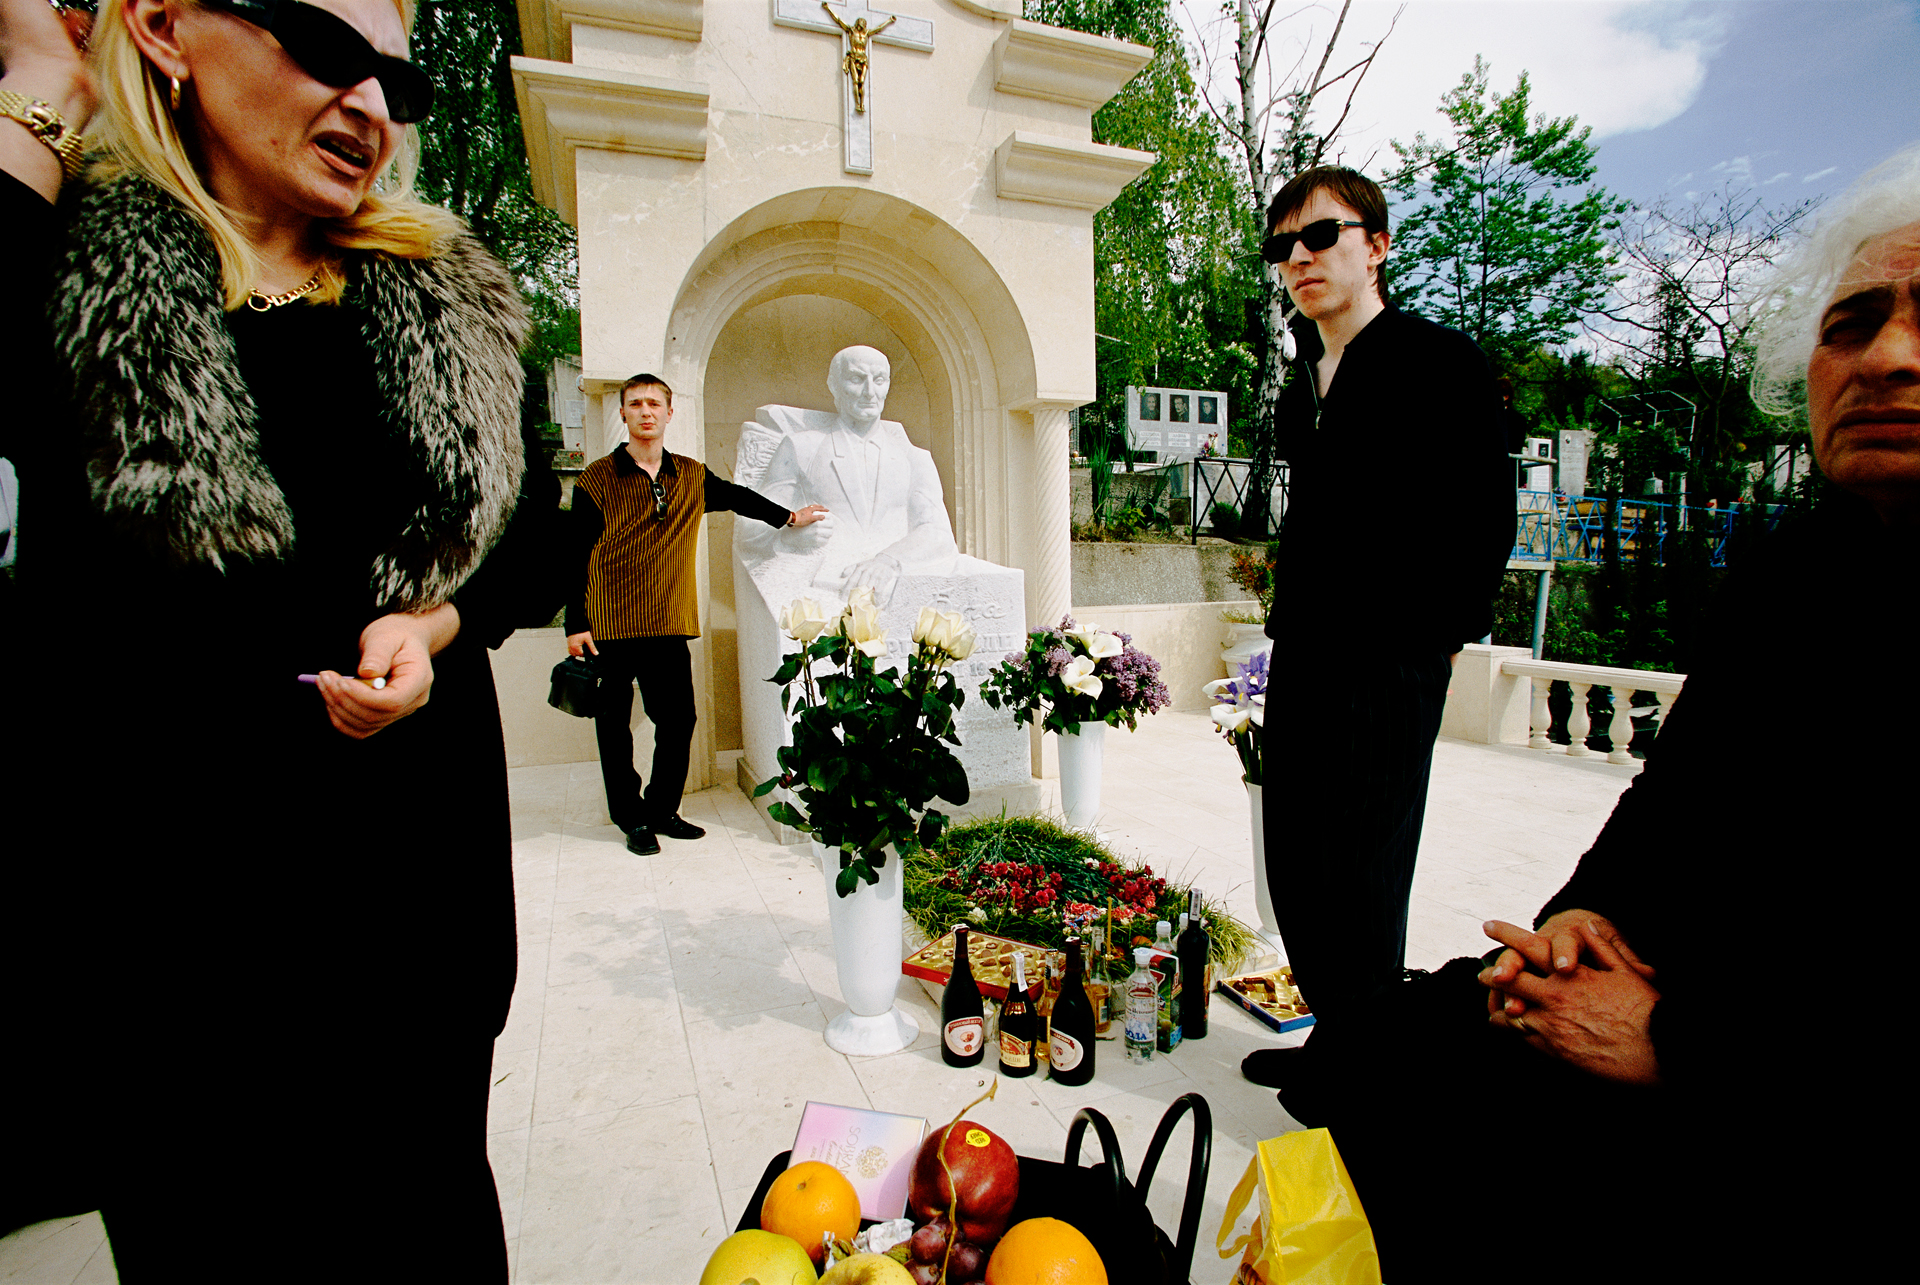  New Russians – probably part of the affluent mafia crowd – honor an old tradition: Gathering to wine and dine at the grave of a deceased relative on Parent’s Day.  Sochi, Russia  